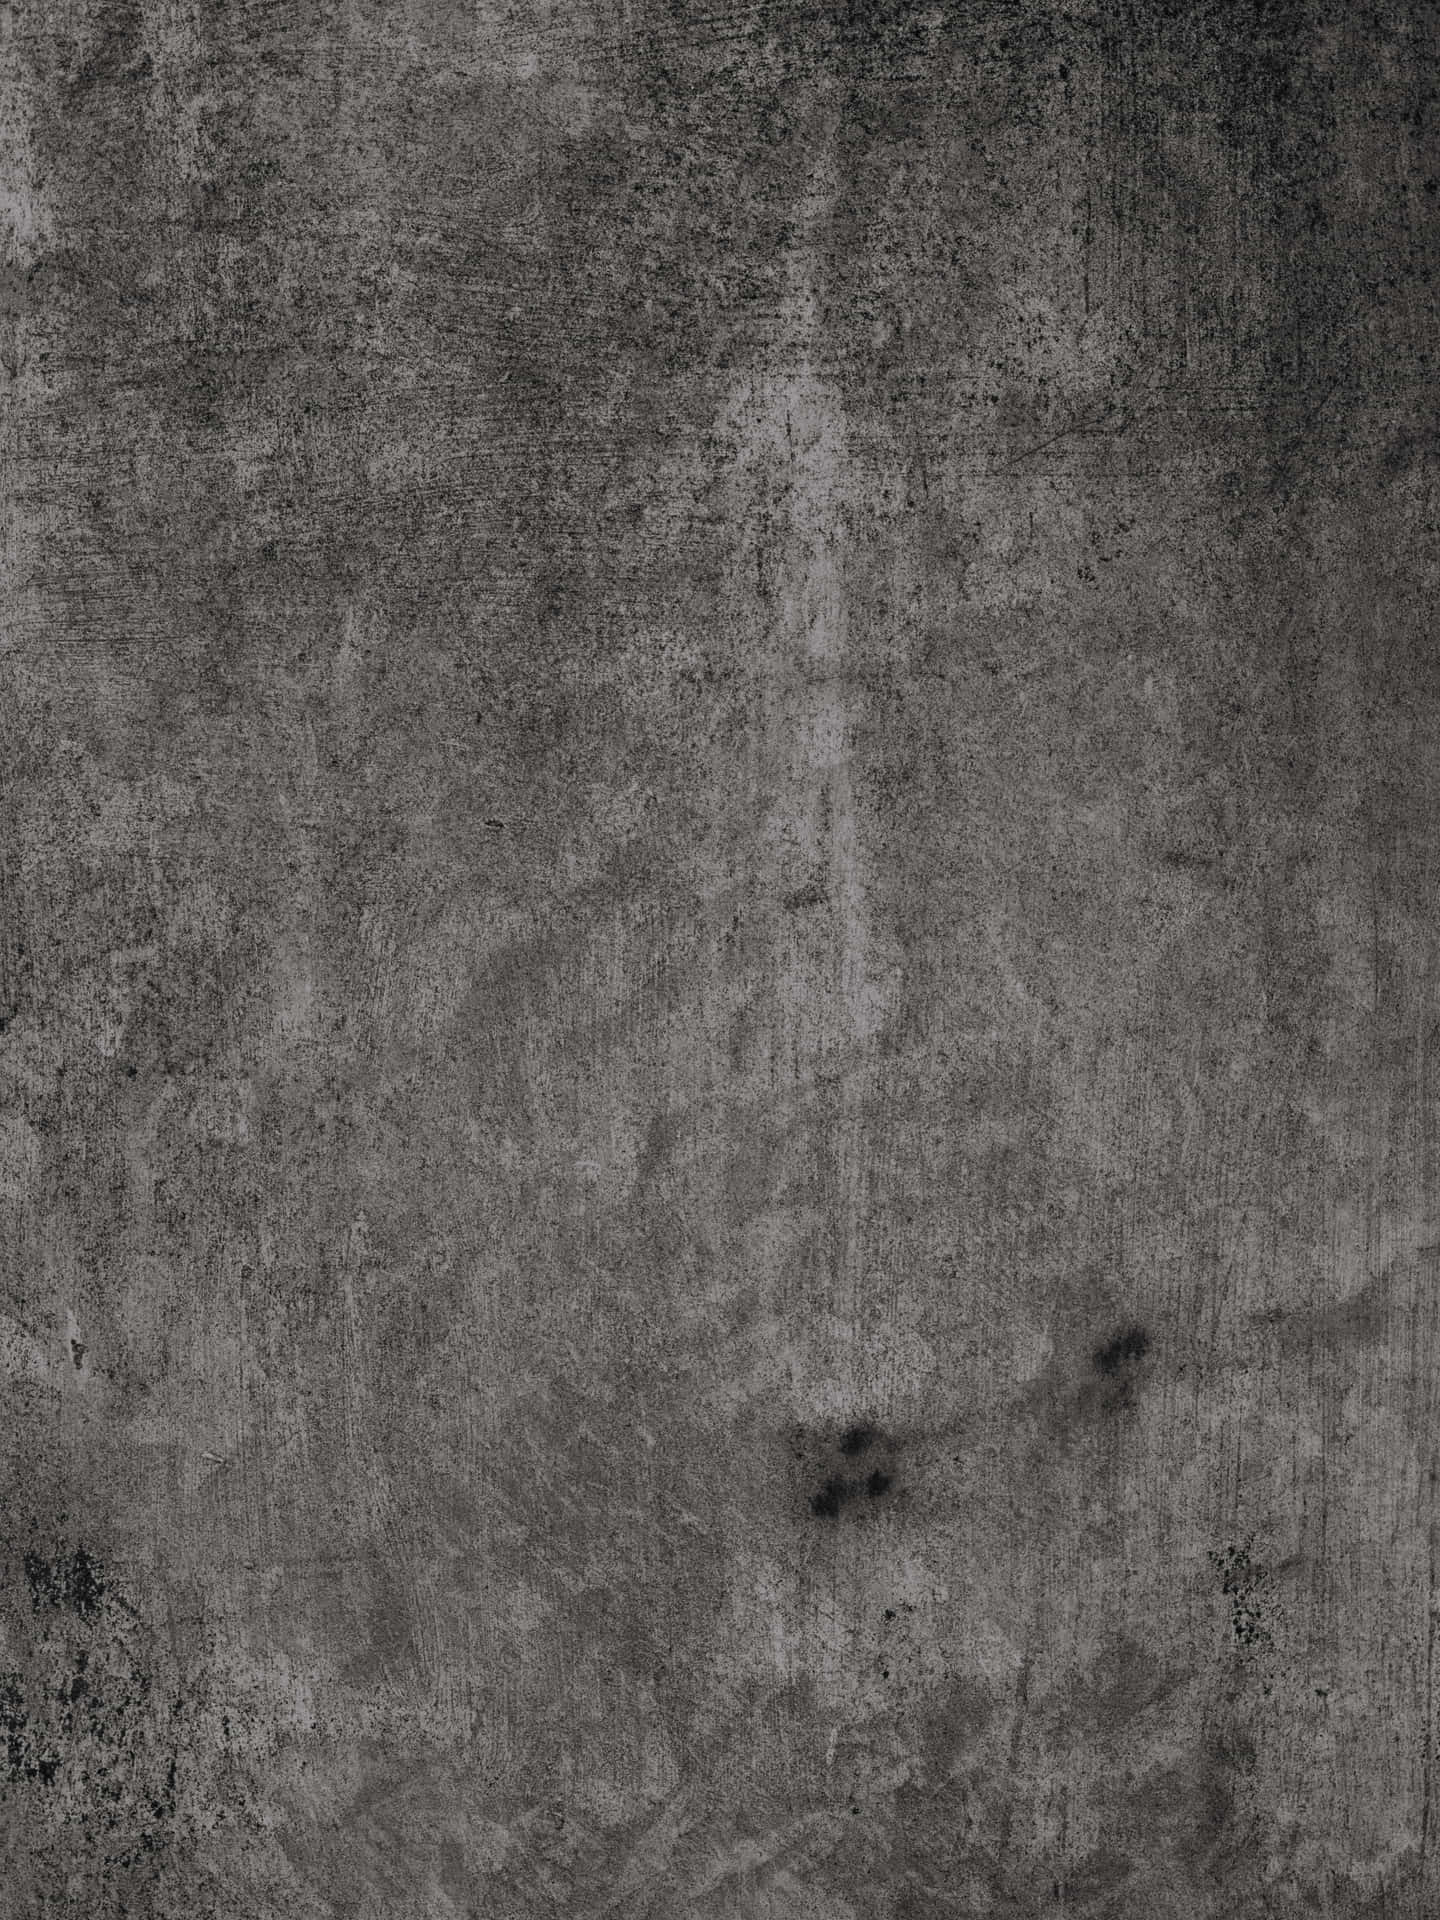 Dark and mysterious, this black grunge texture is aesthetically textured Wallpaper